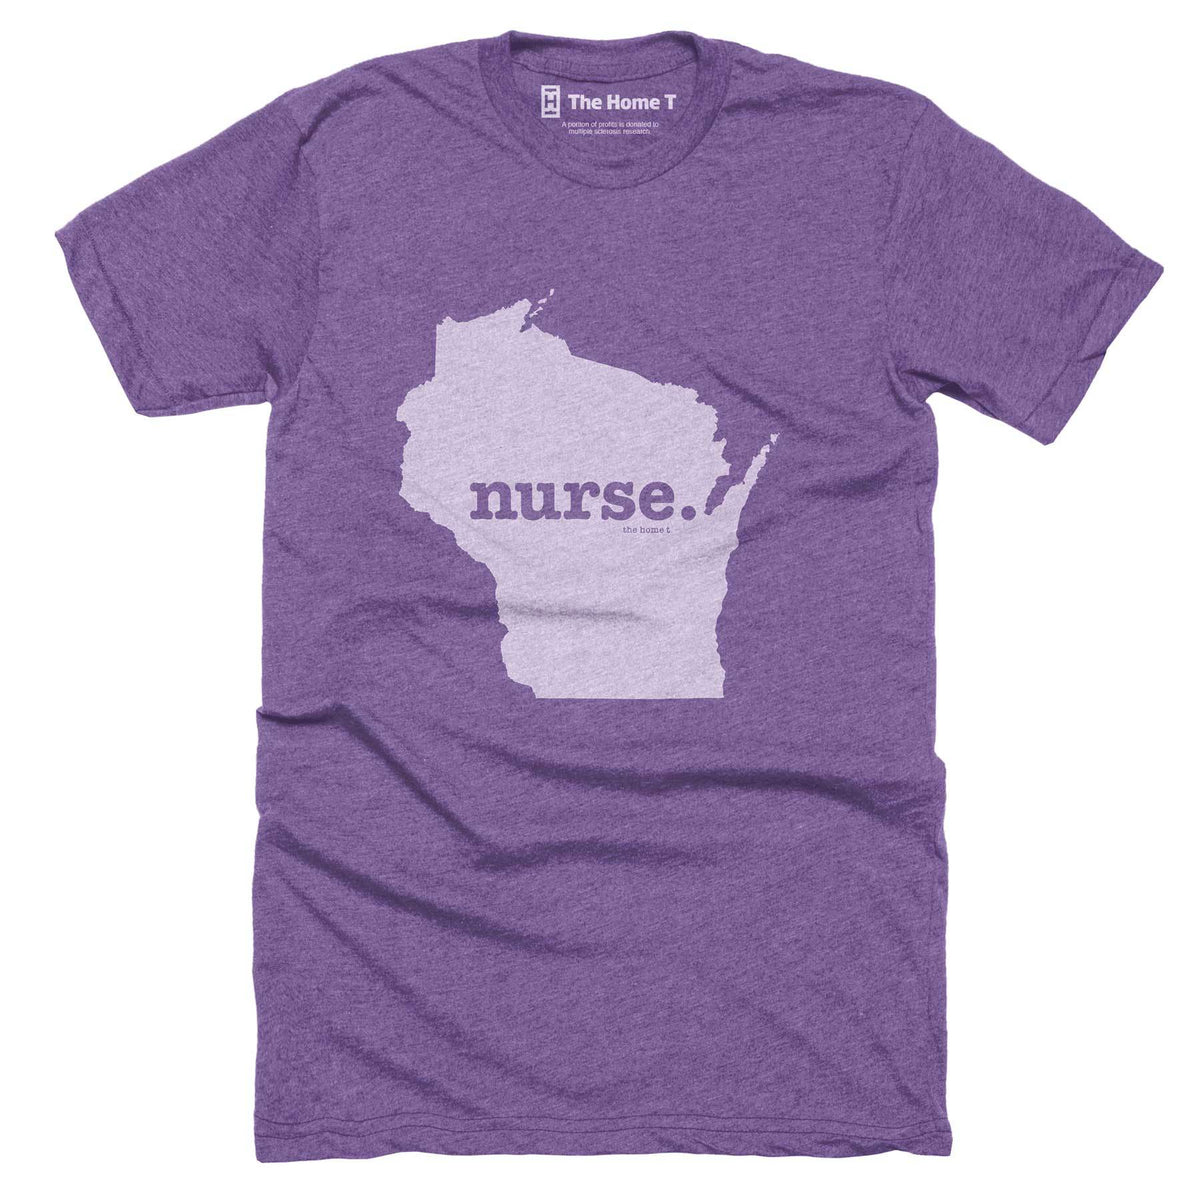 Wisconsin Nurse Home T-Shirt Occupation The Home T